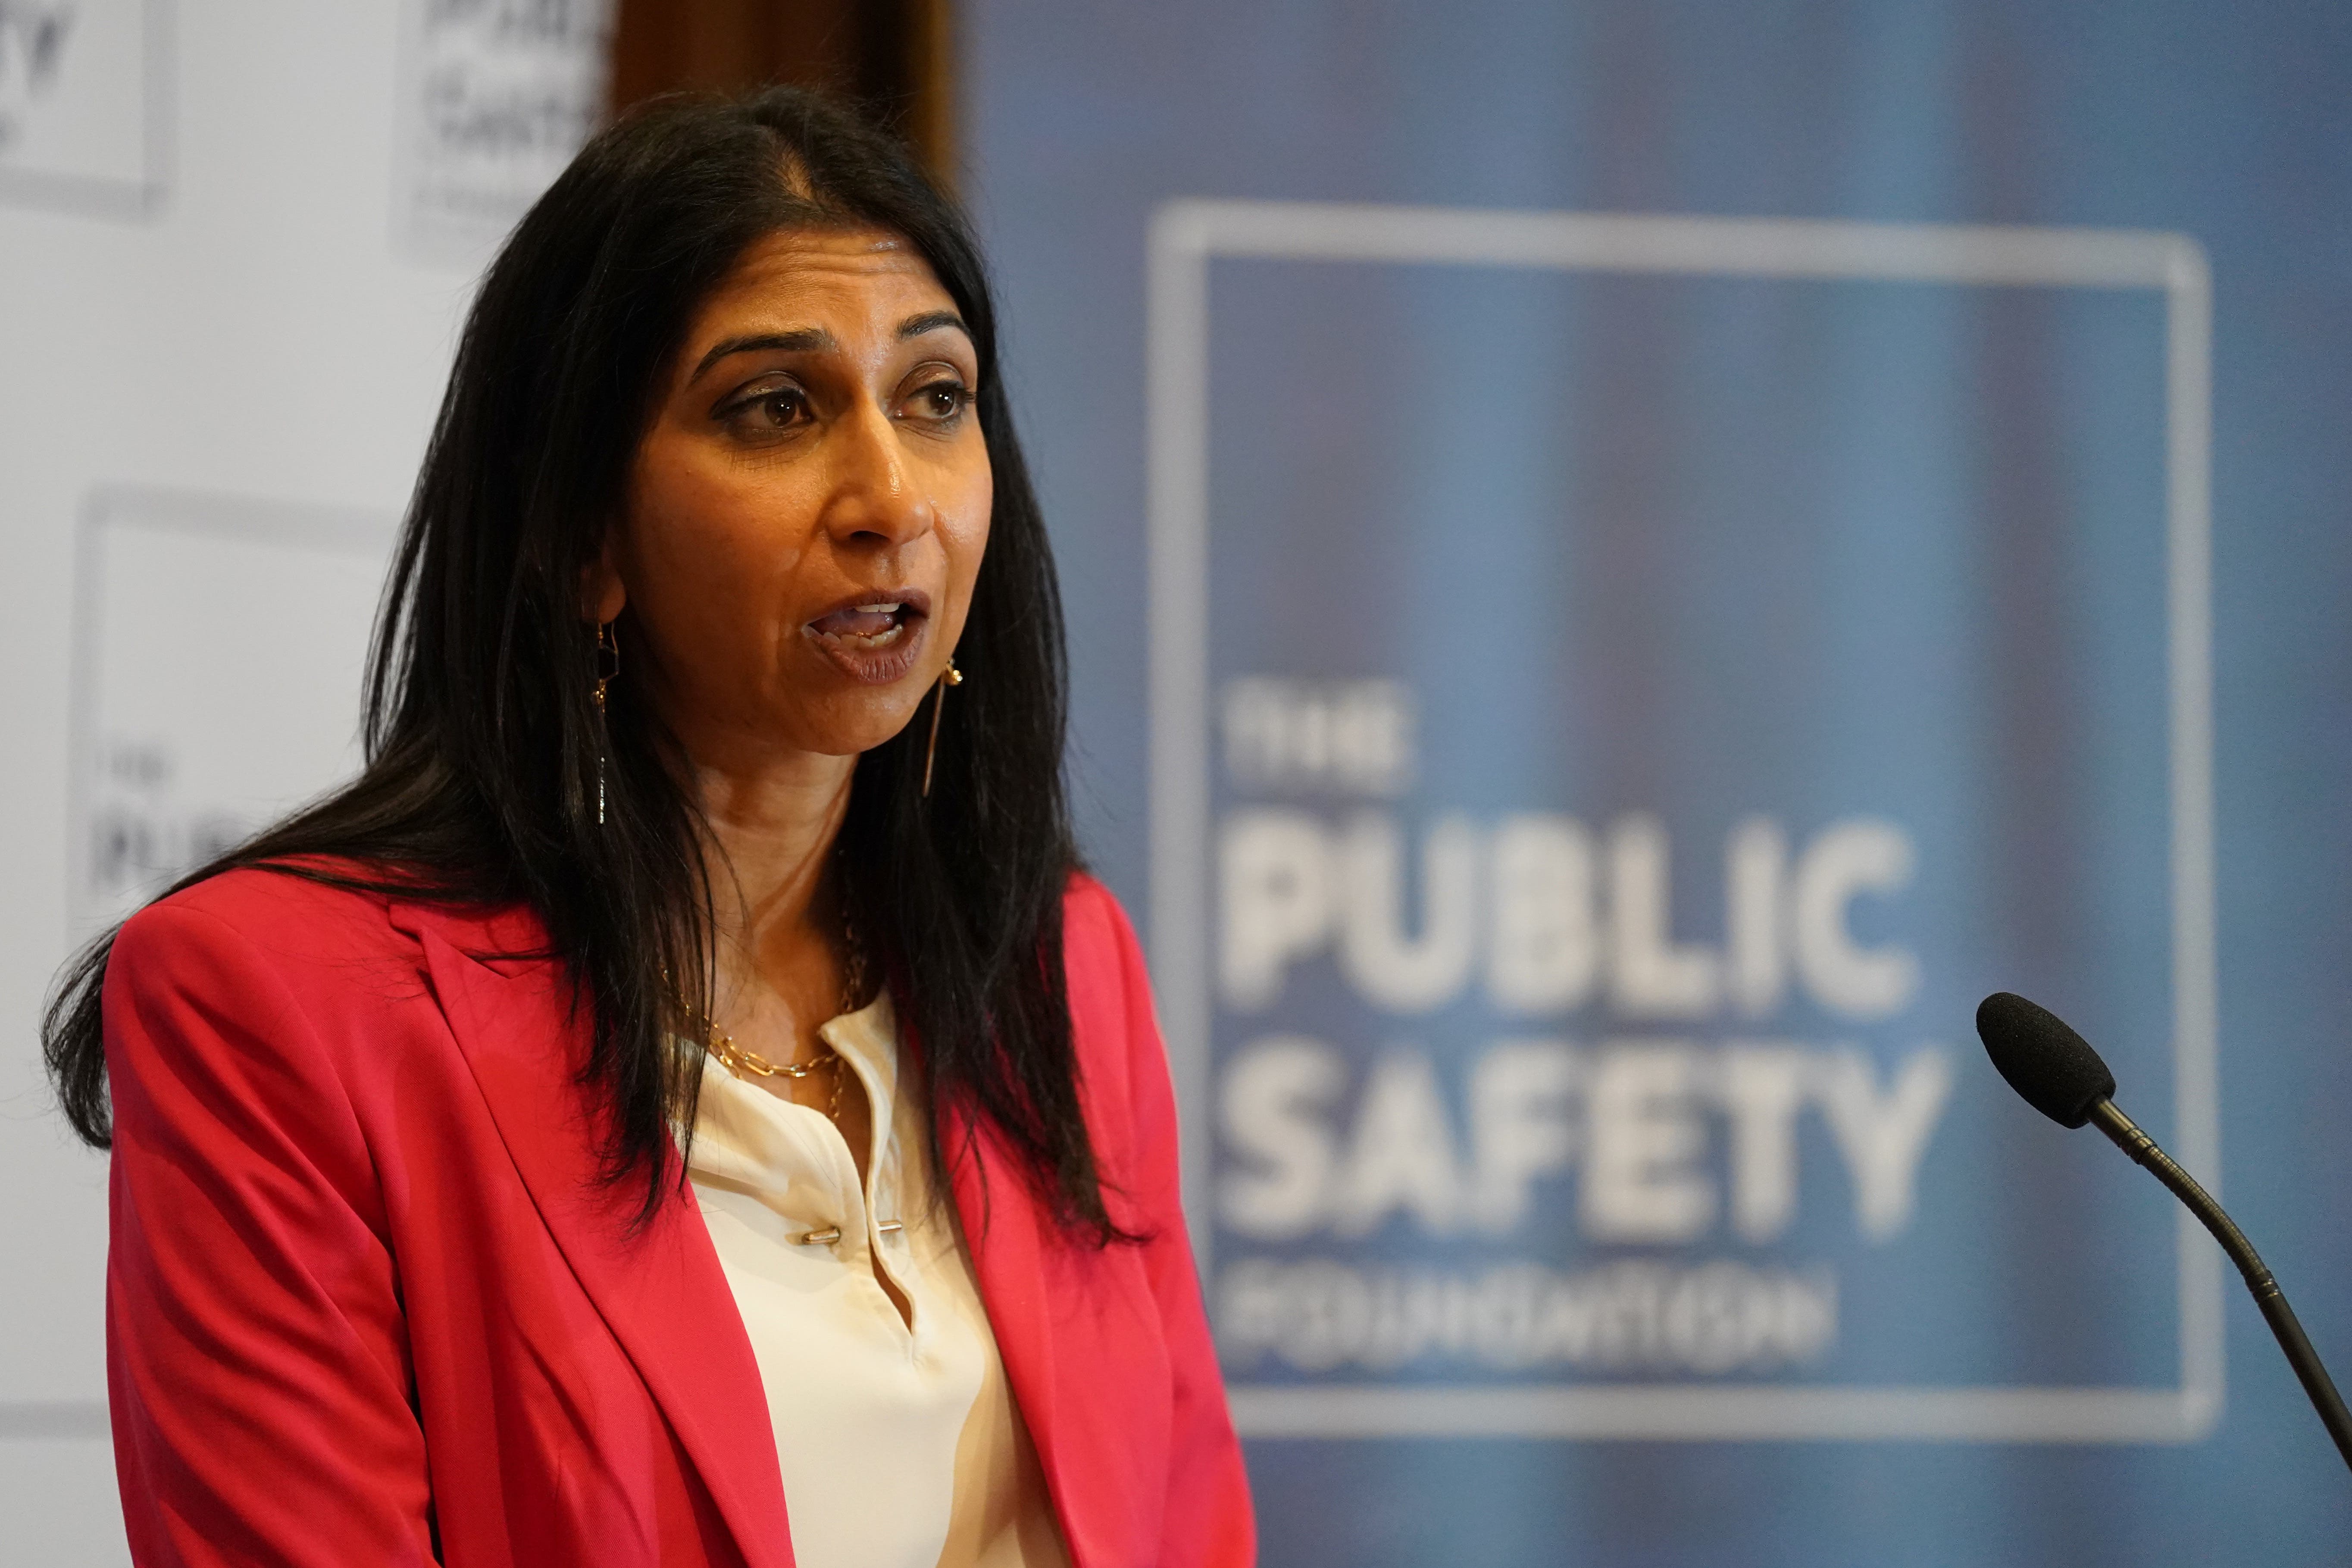 Home Secretary Suella Braverman delivers a speech on policing at the Public Safety Foundation think tank in central London (Stefan Rousseau/PA)